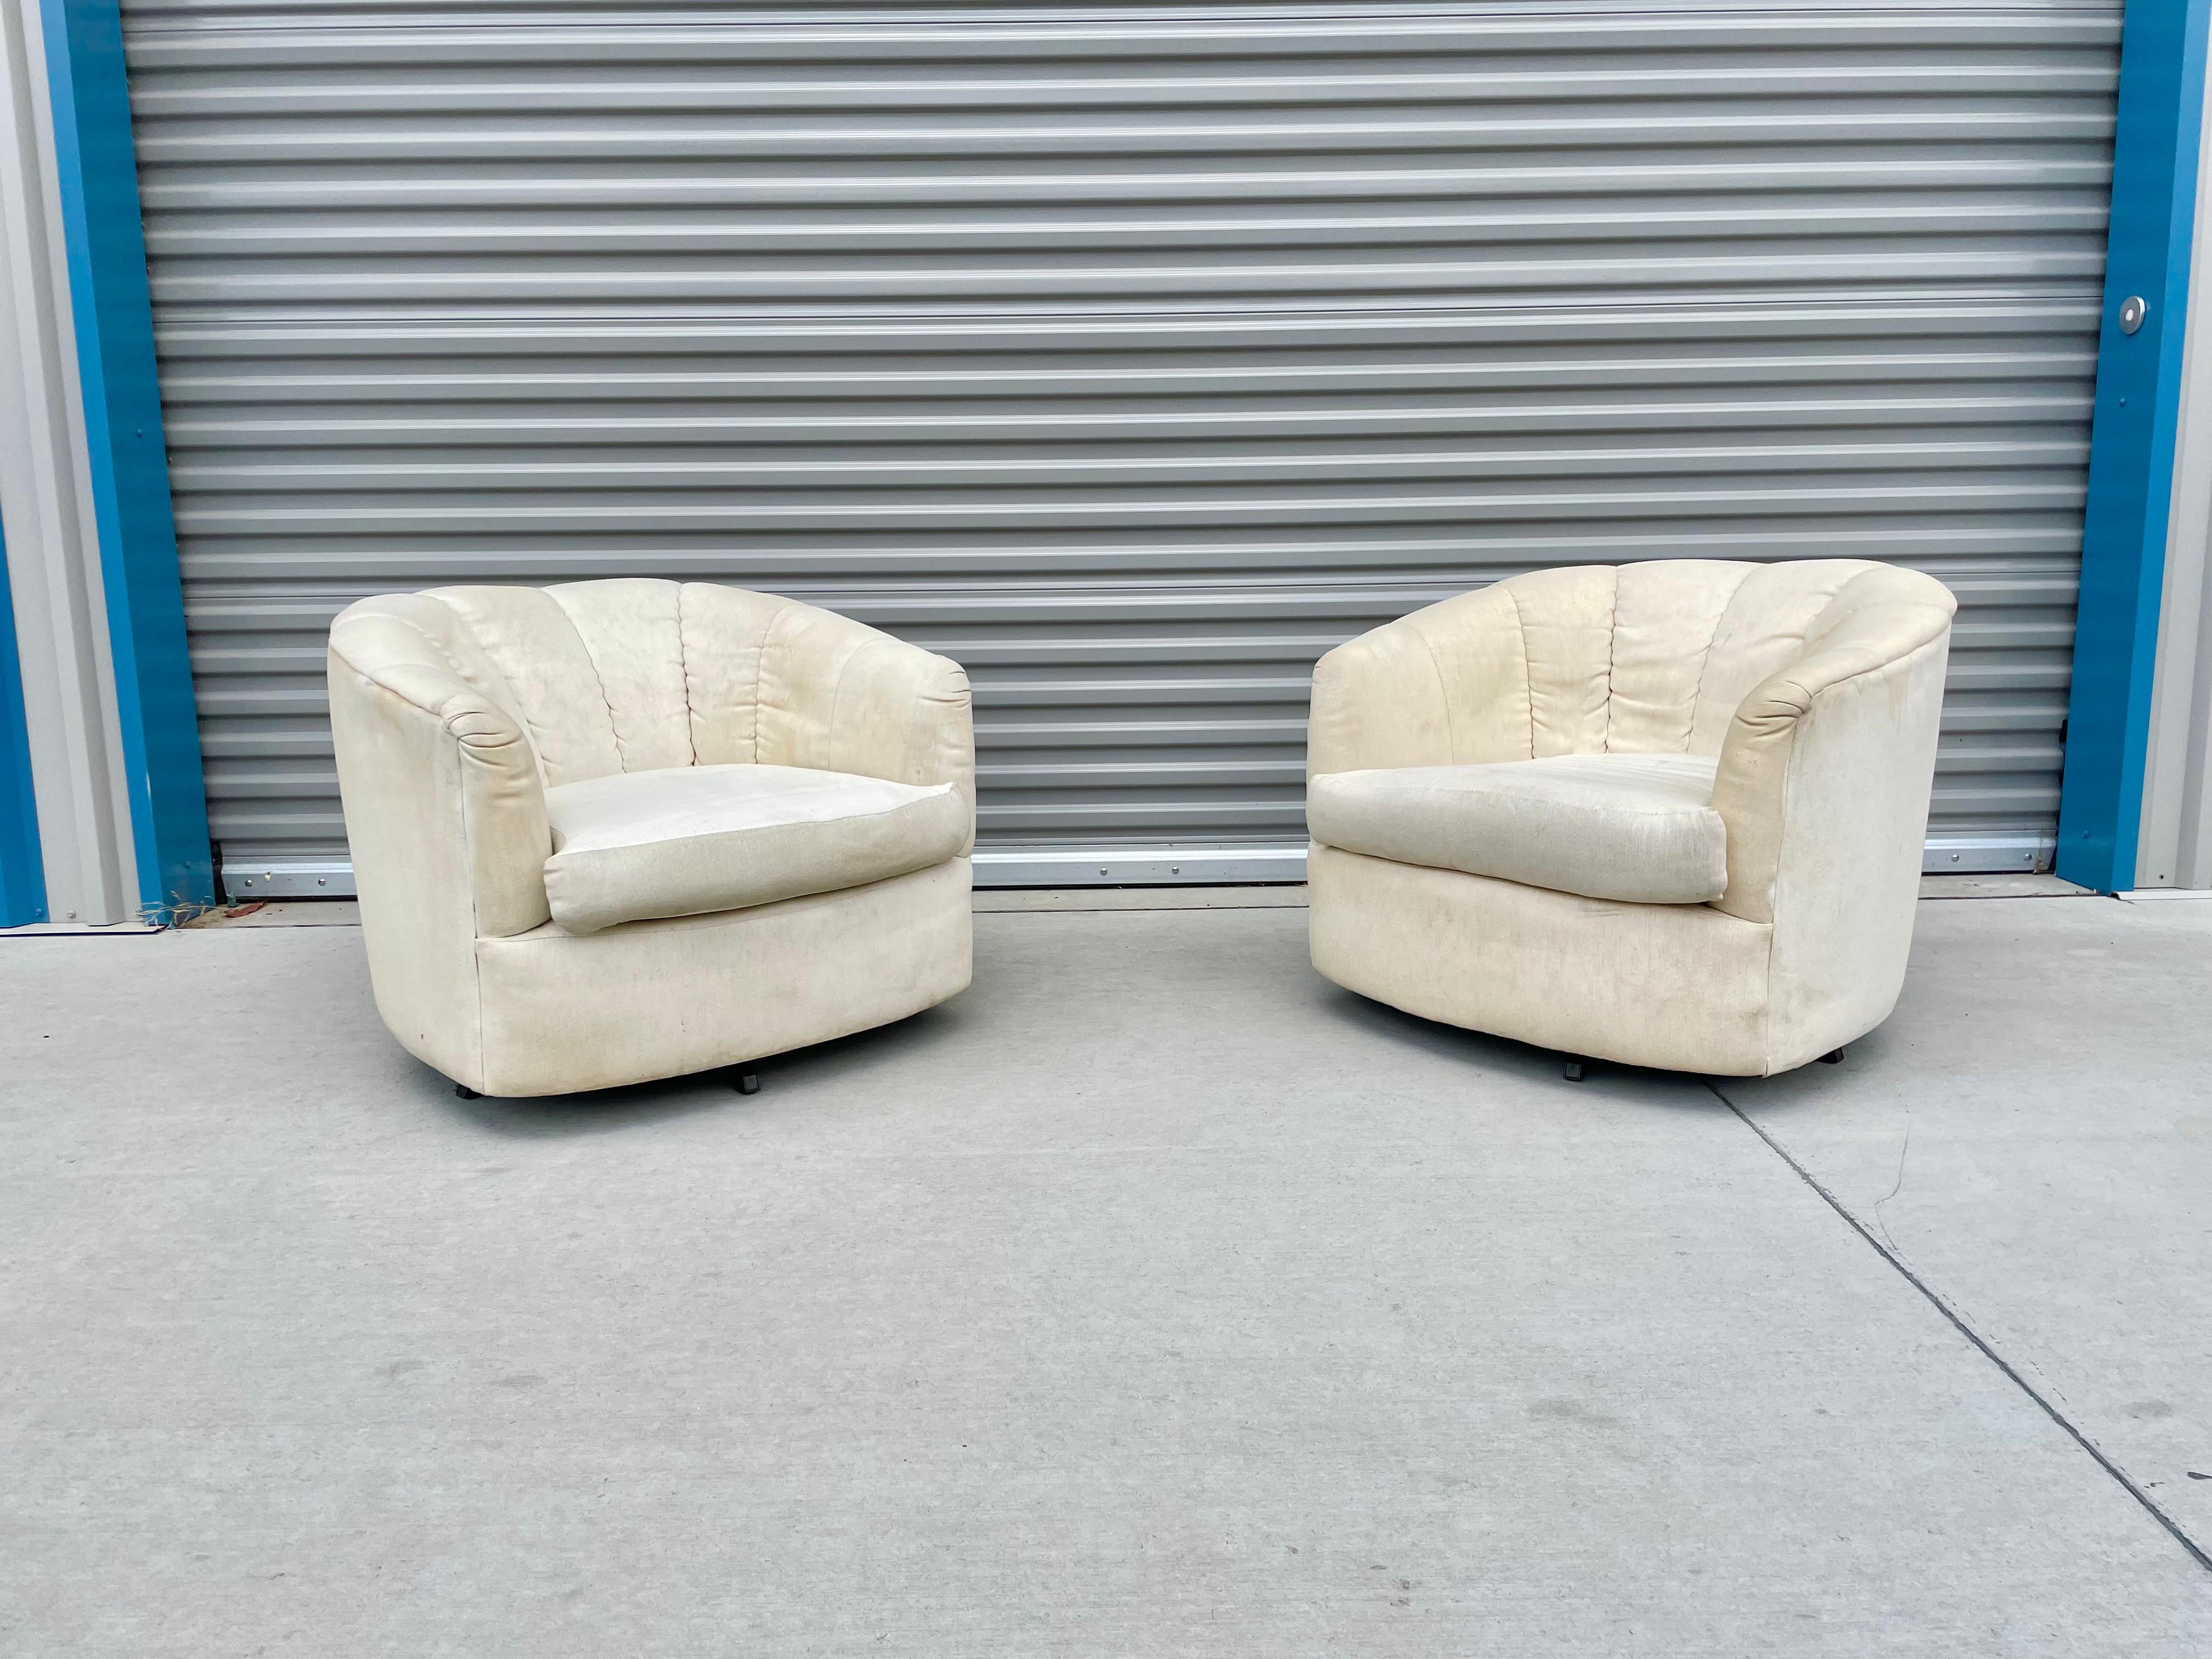 Midcentury Barrel Chairs Styled After Milo Baughman In Good Condition For Sale In North Hollywood, CA